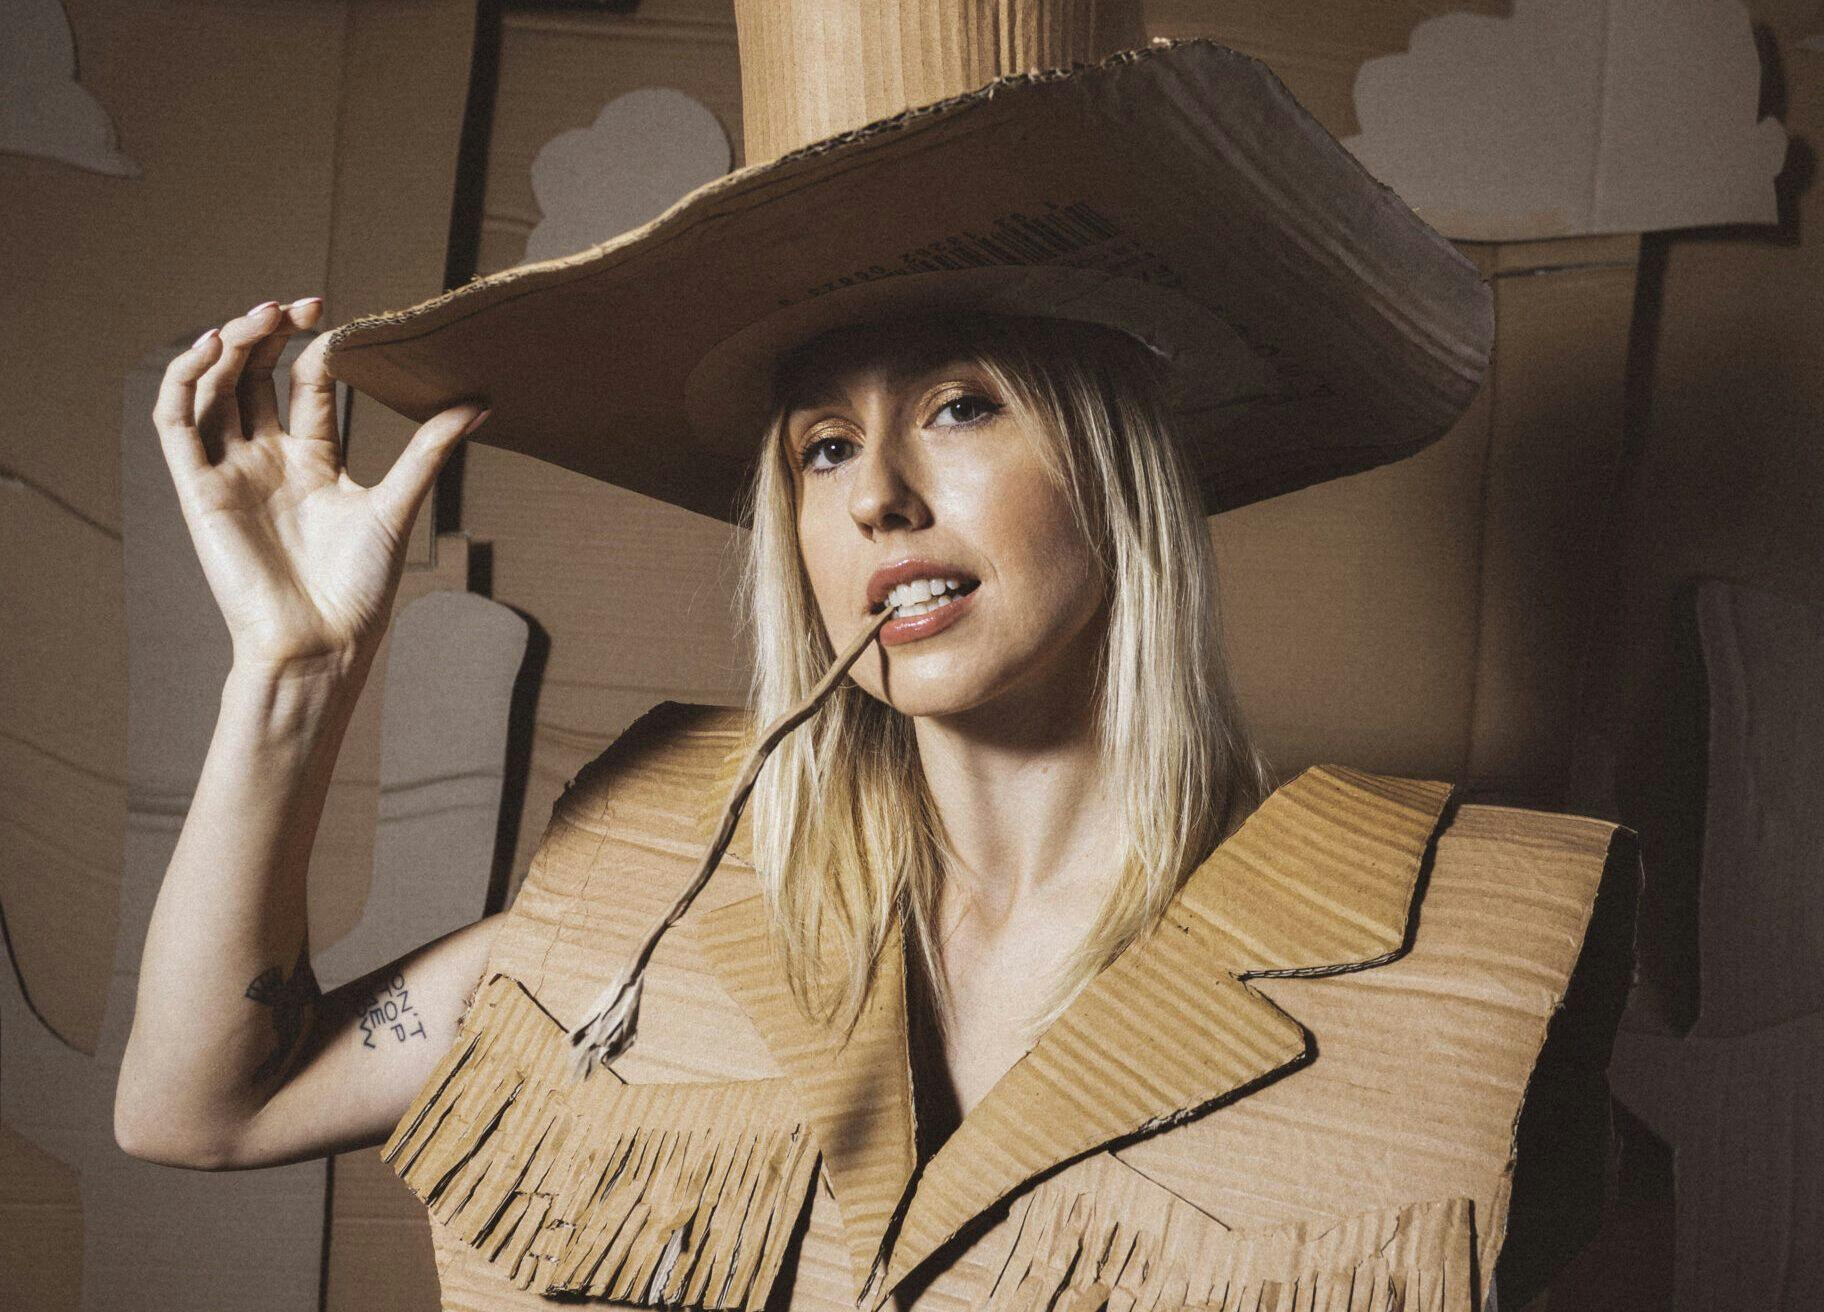 A woman wearing a cardboard costume and hat, looking creative and playful.